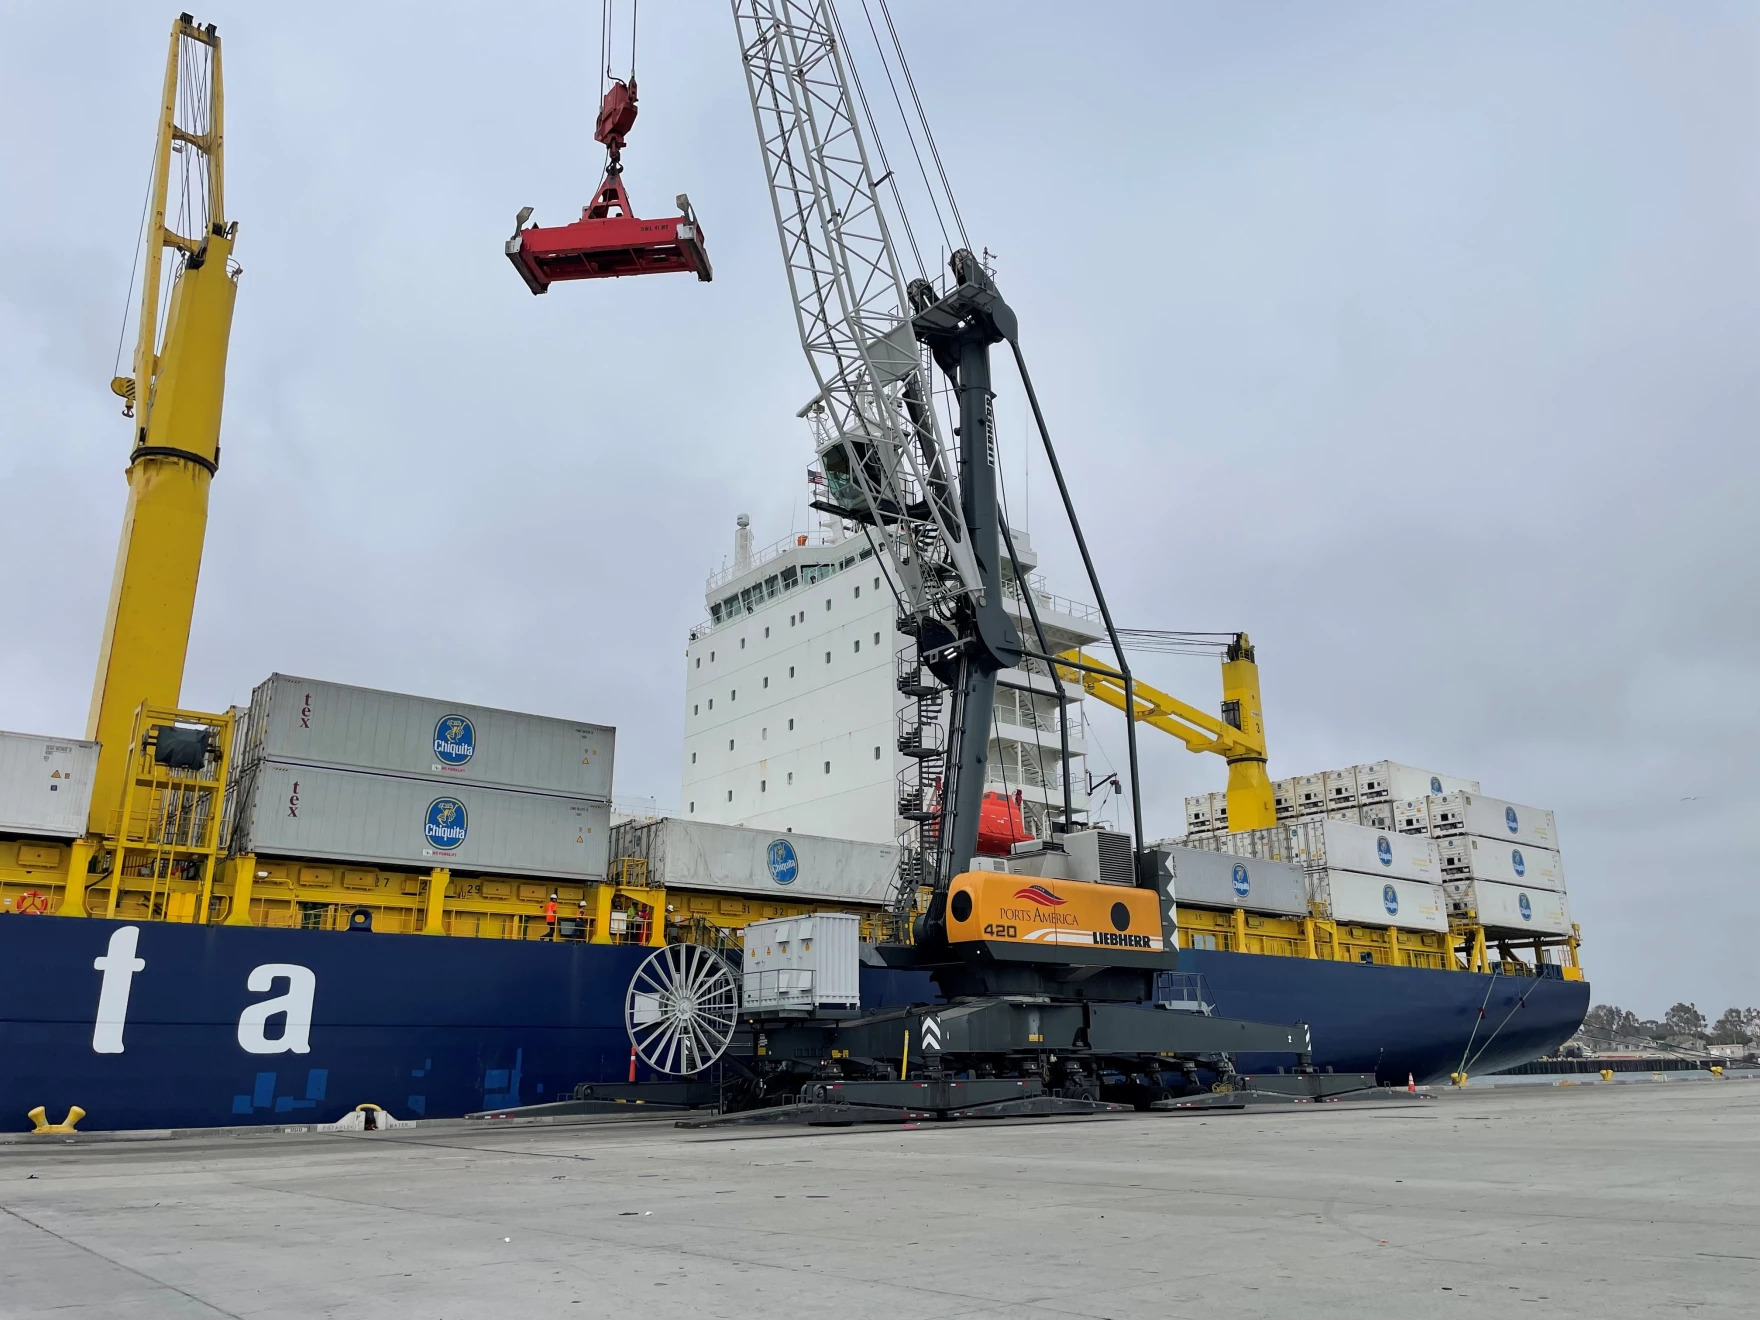 a large crane loading containers onto a large container ship in port